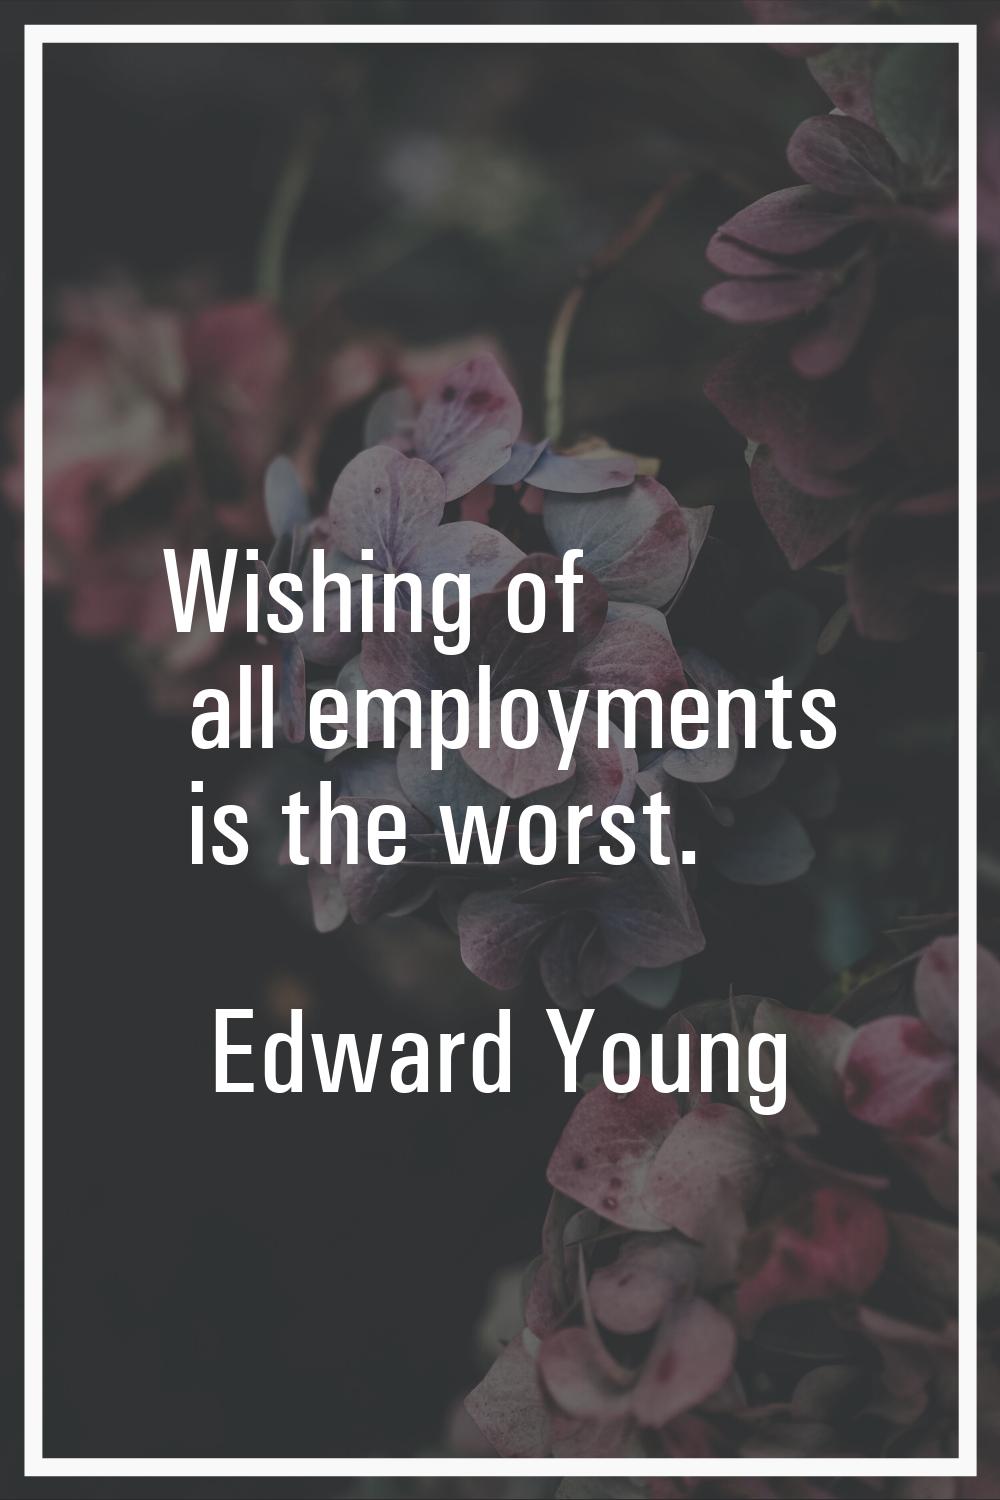 Wishing of all employments is the worst.